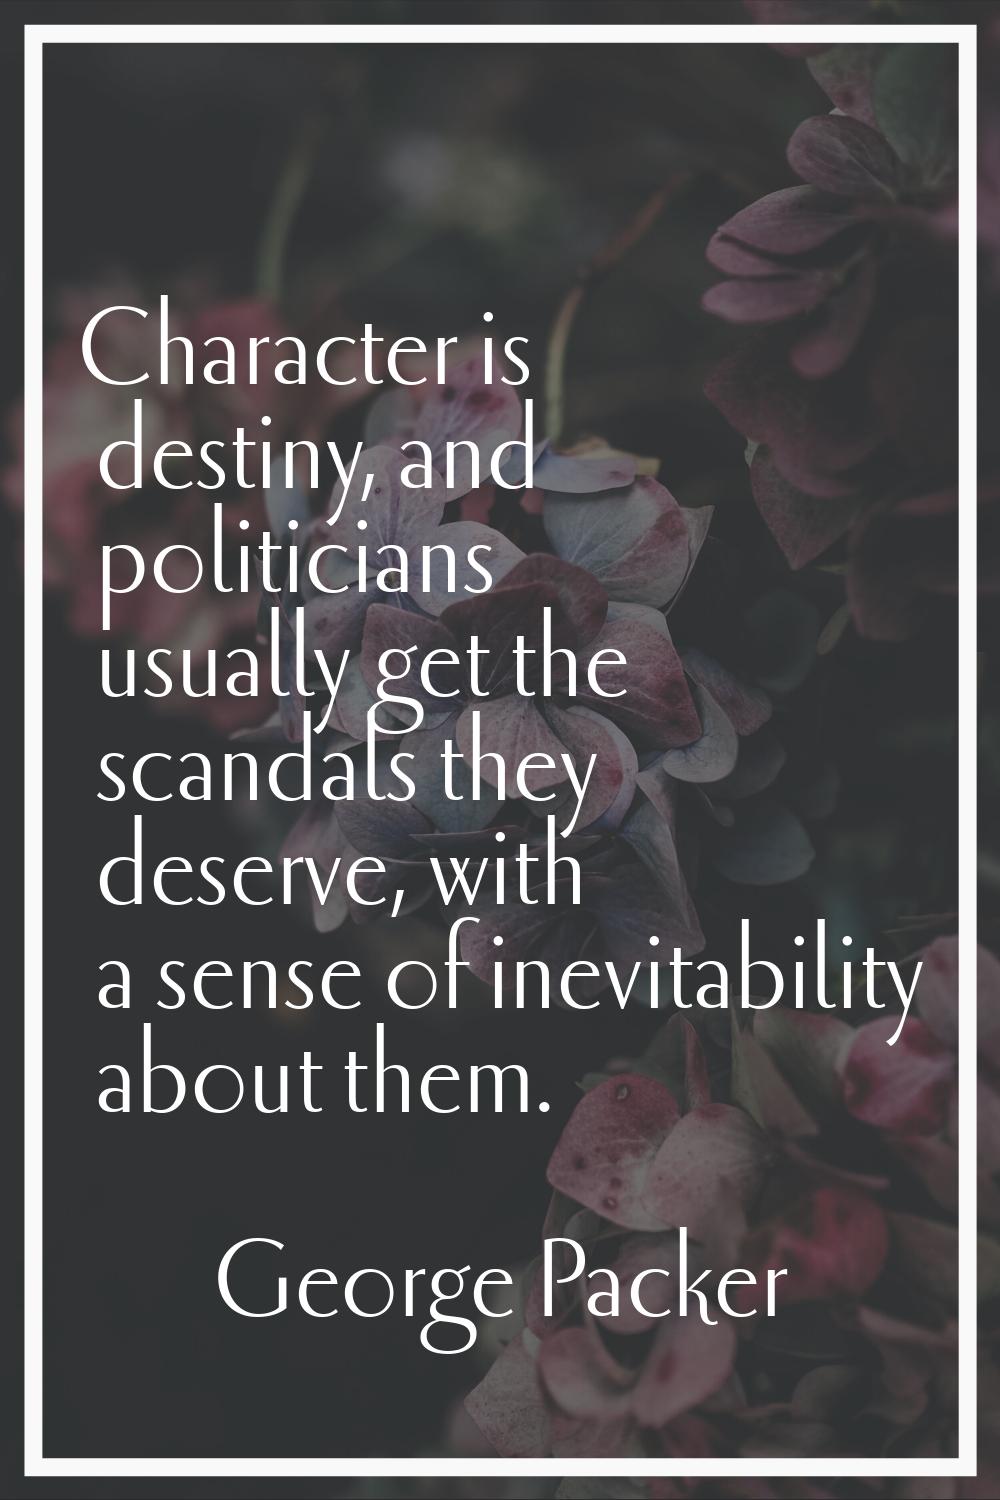 Character is destiny, and politicians usually get the scandals they deserve, with a sense of inevit